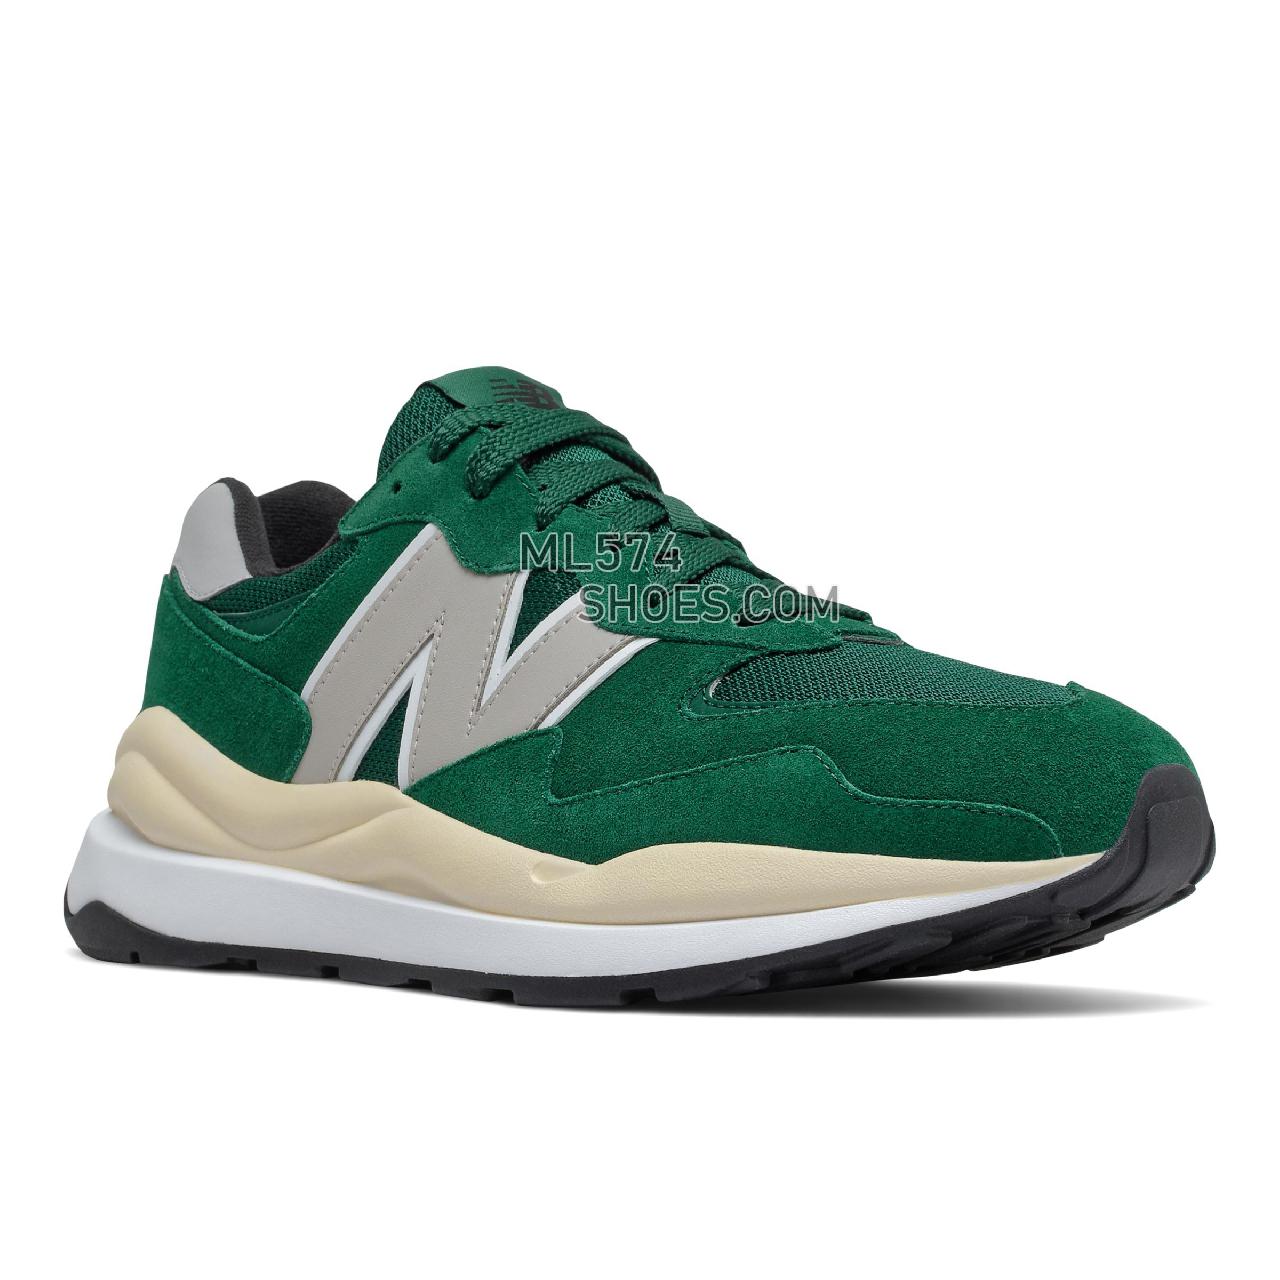 New Balance 57/40 - Men's Sport Style Sneakers - Nightwatch Green with Rain Cloud - M5740HR1